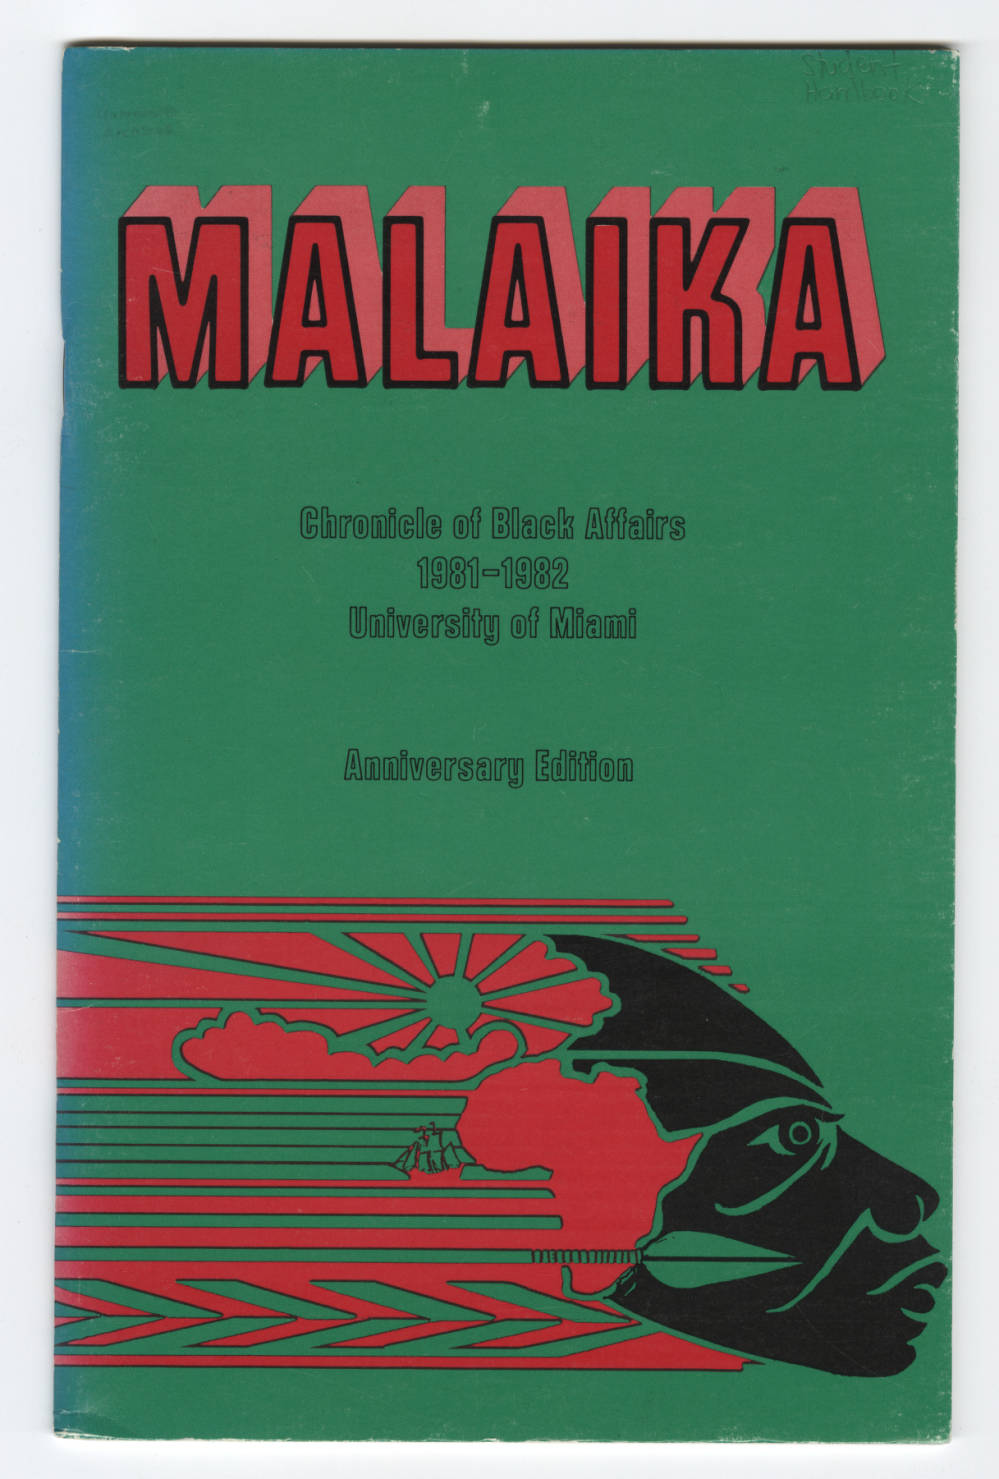 cover of Malaika handbook, green background, red lettering, graphic design